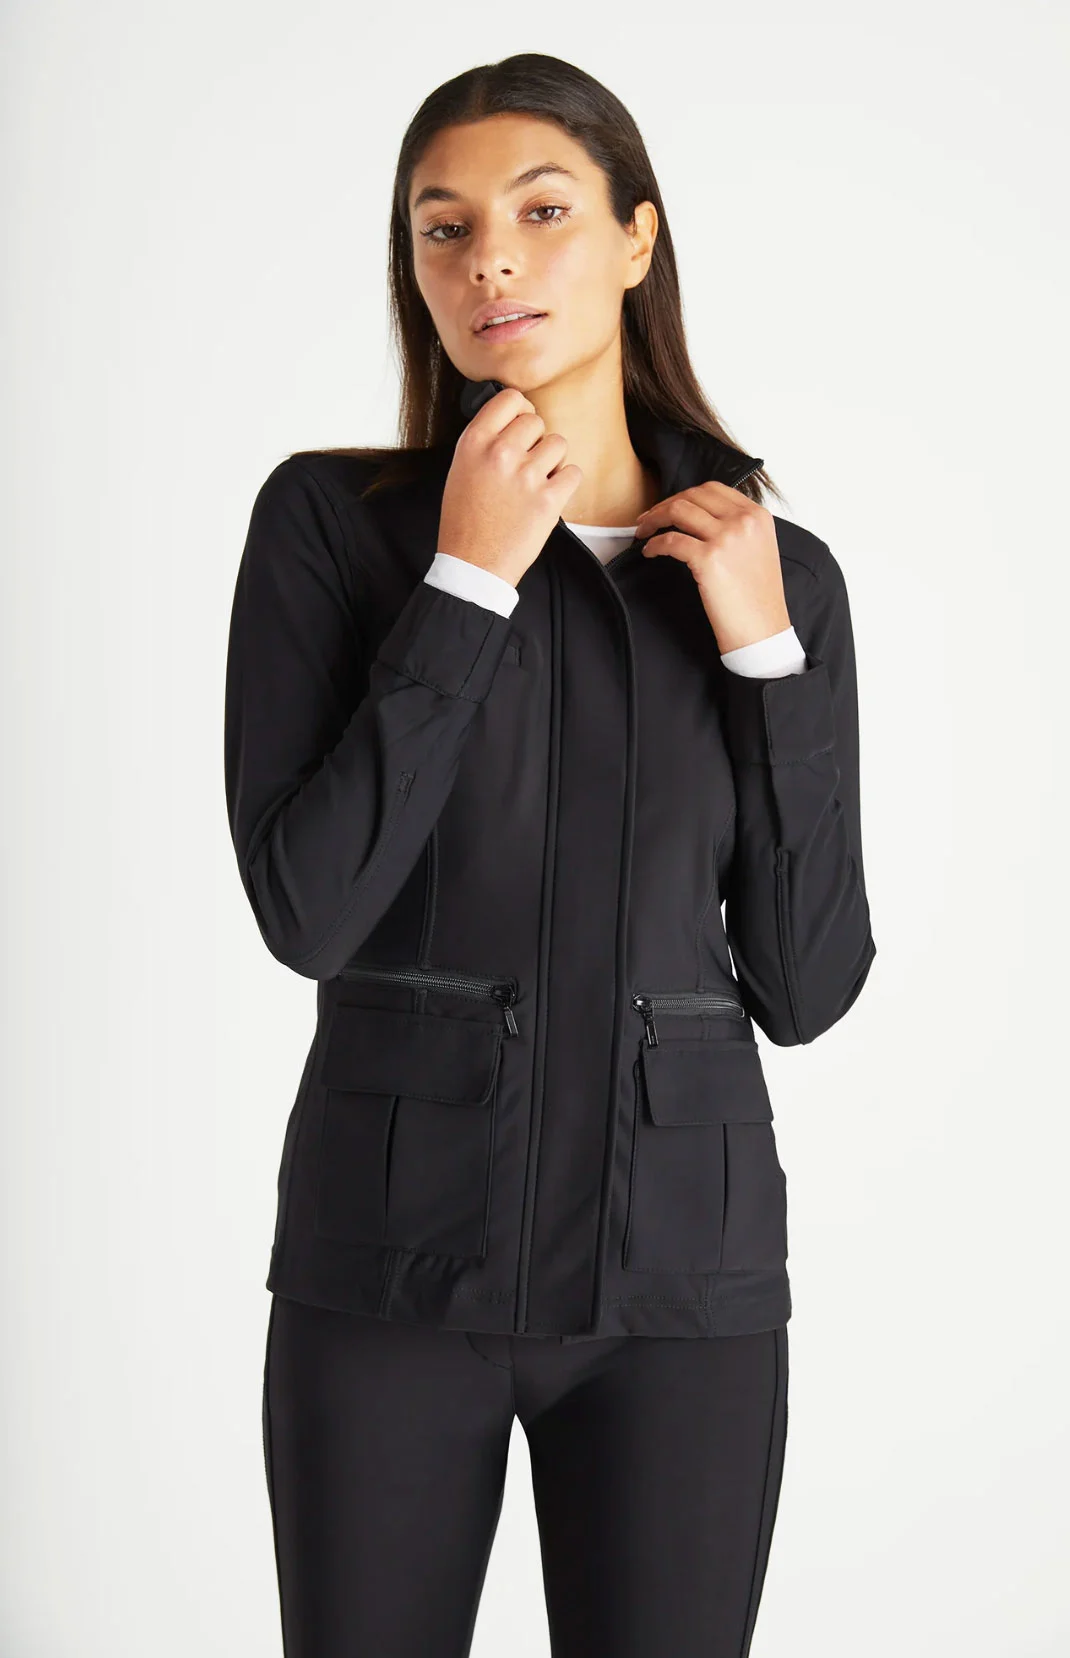 Attractive dark haired woman modelling a black travel jacket standing against a white wall. 